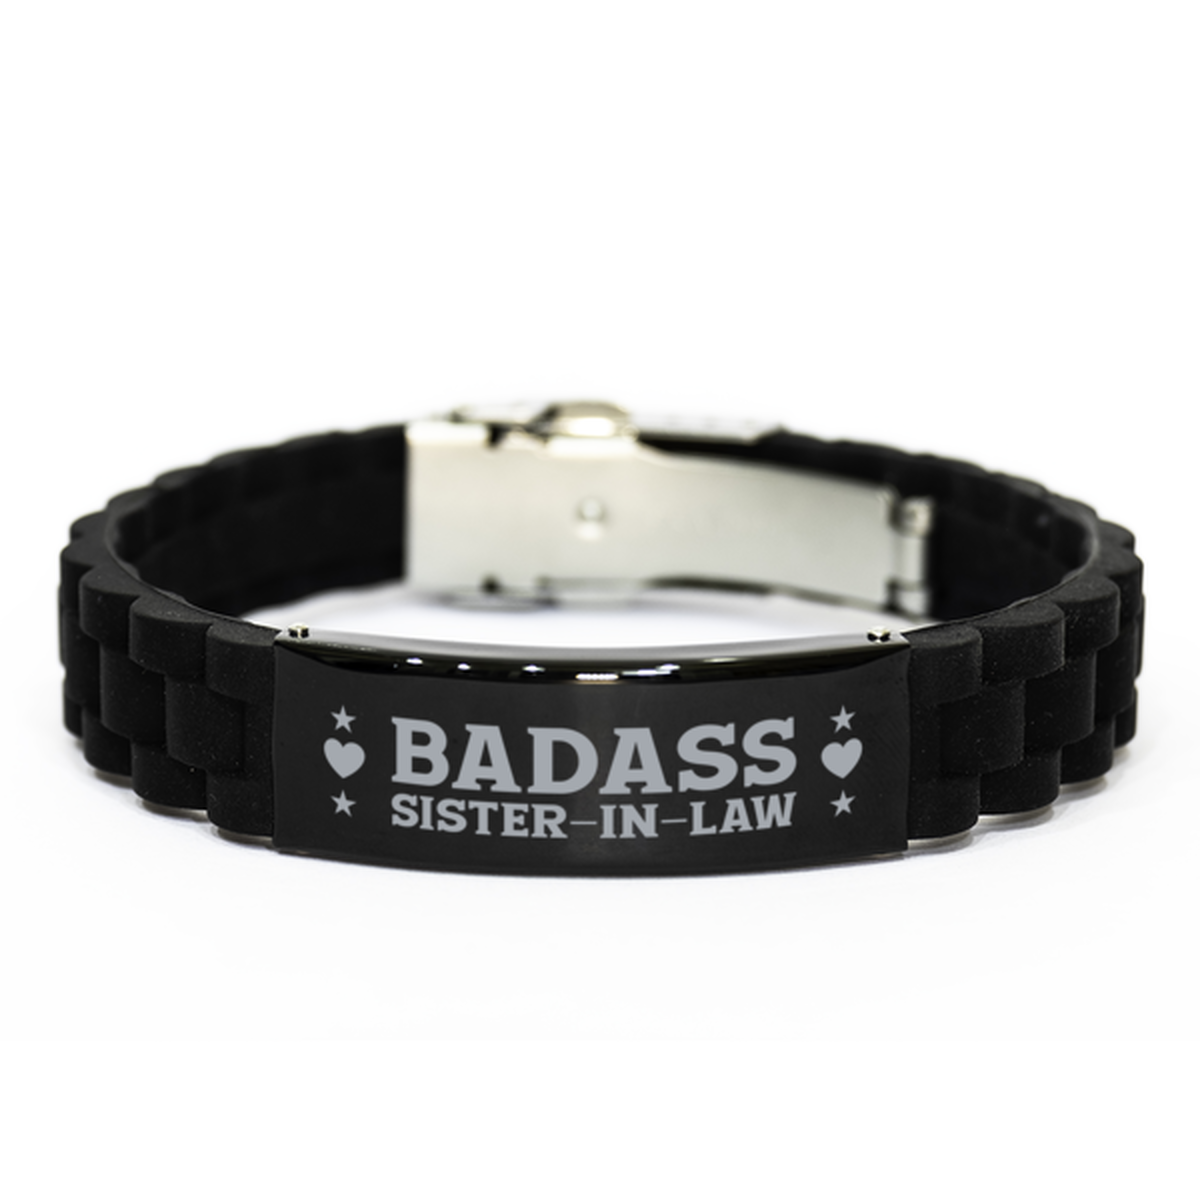 Sister-in-law Black Bracelet, Badass Sister-in-law, Funny Family Gifts For Sister-in-law From Brother Sister